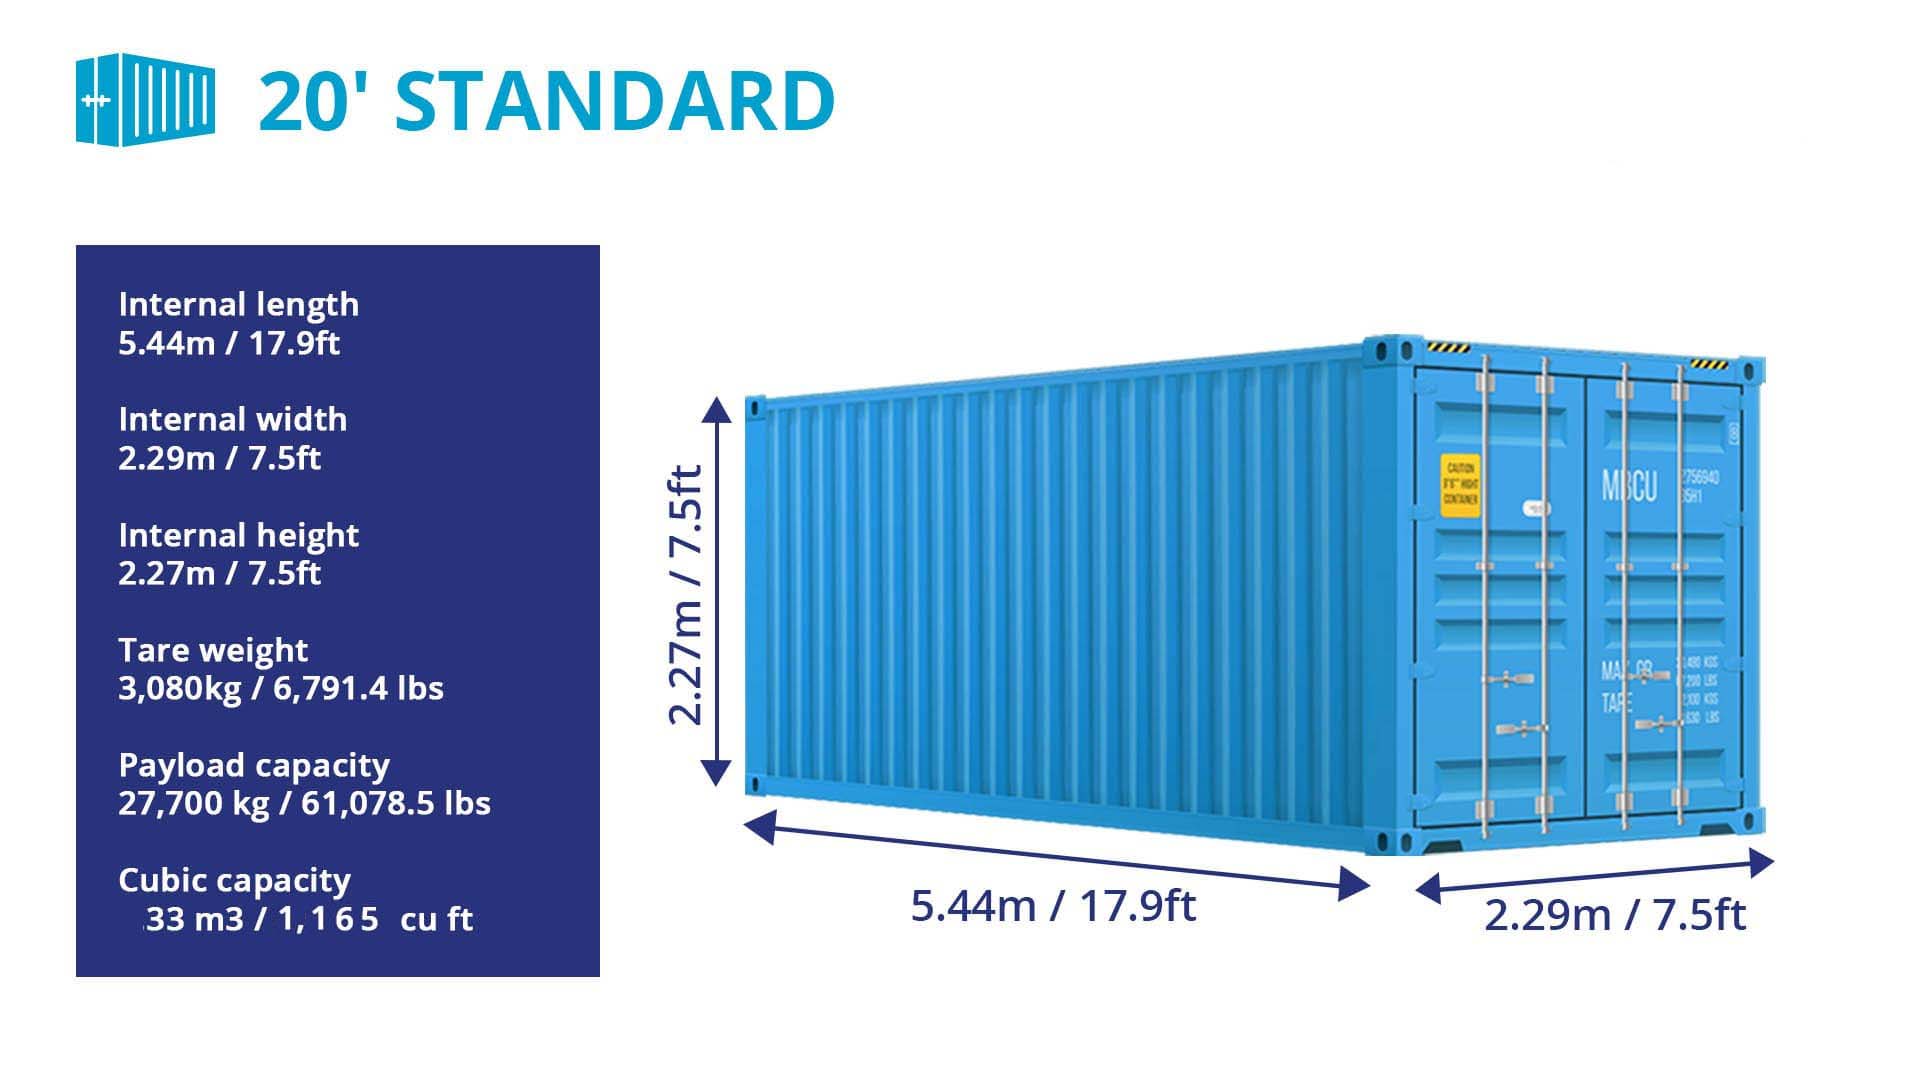 Shipping container dimensions – width, length, and height